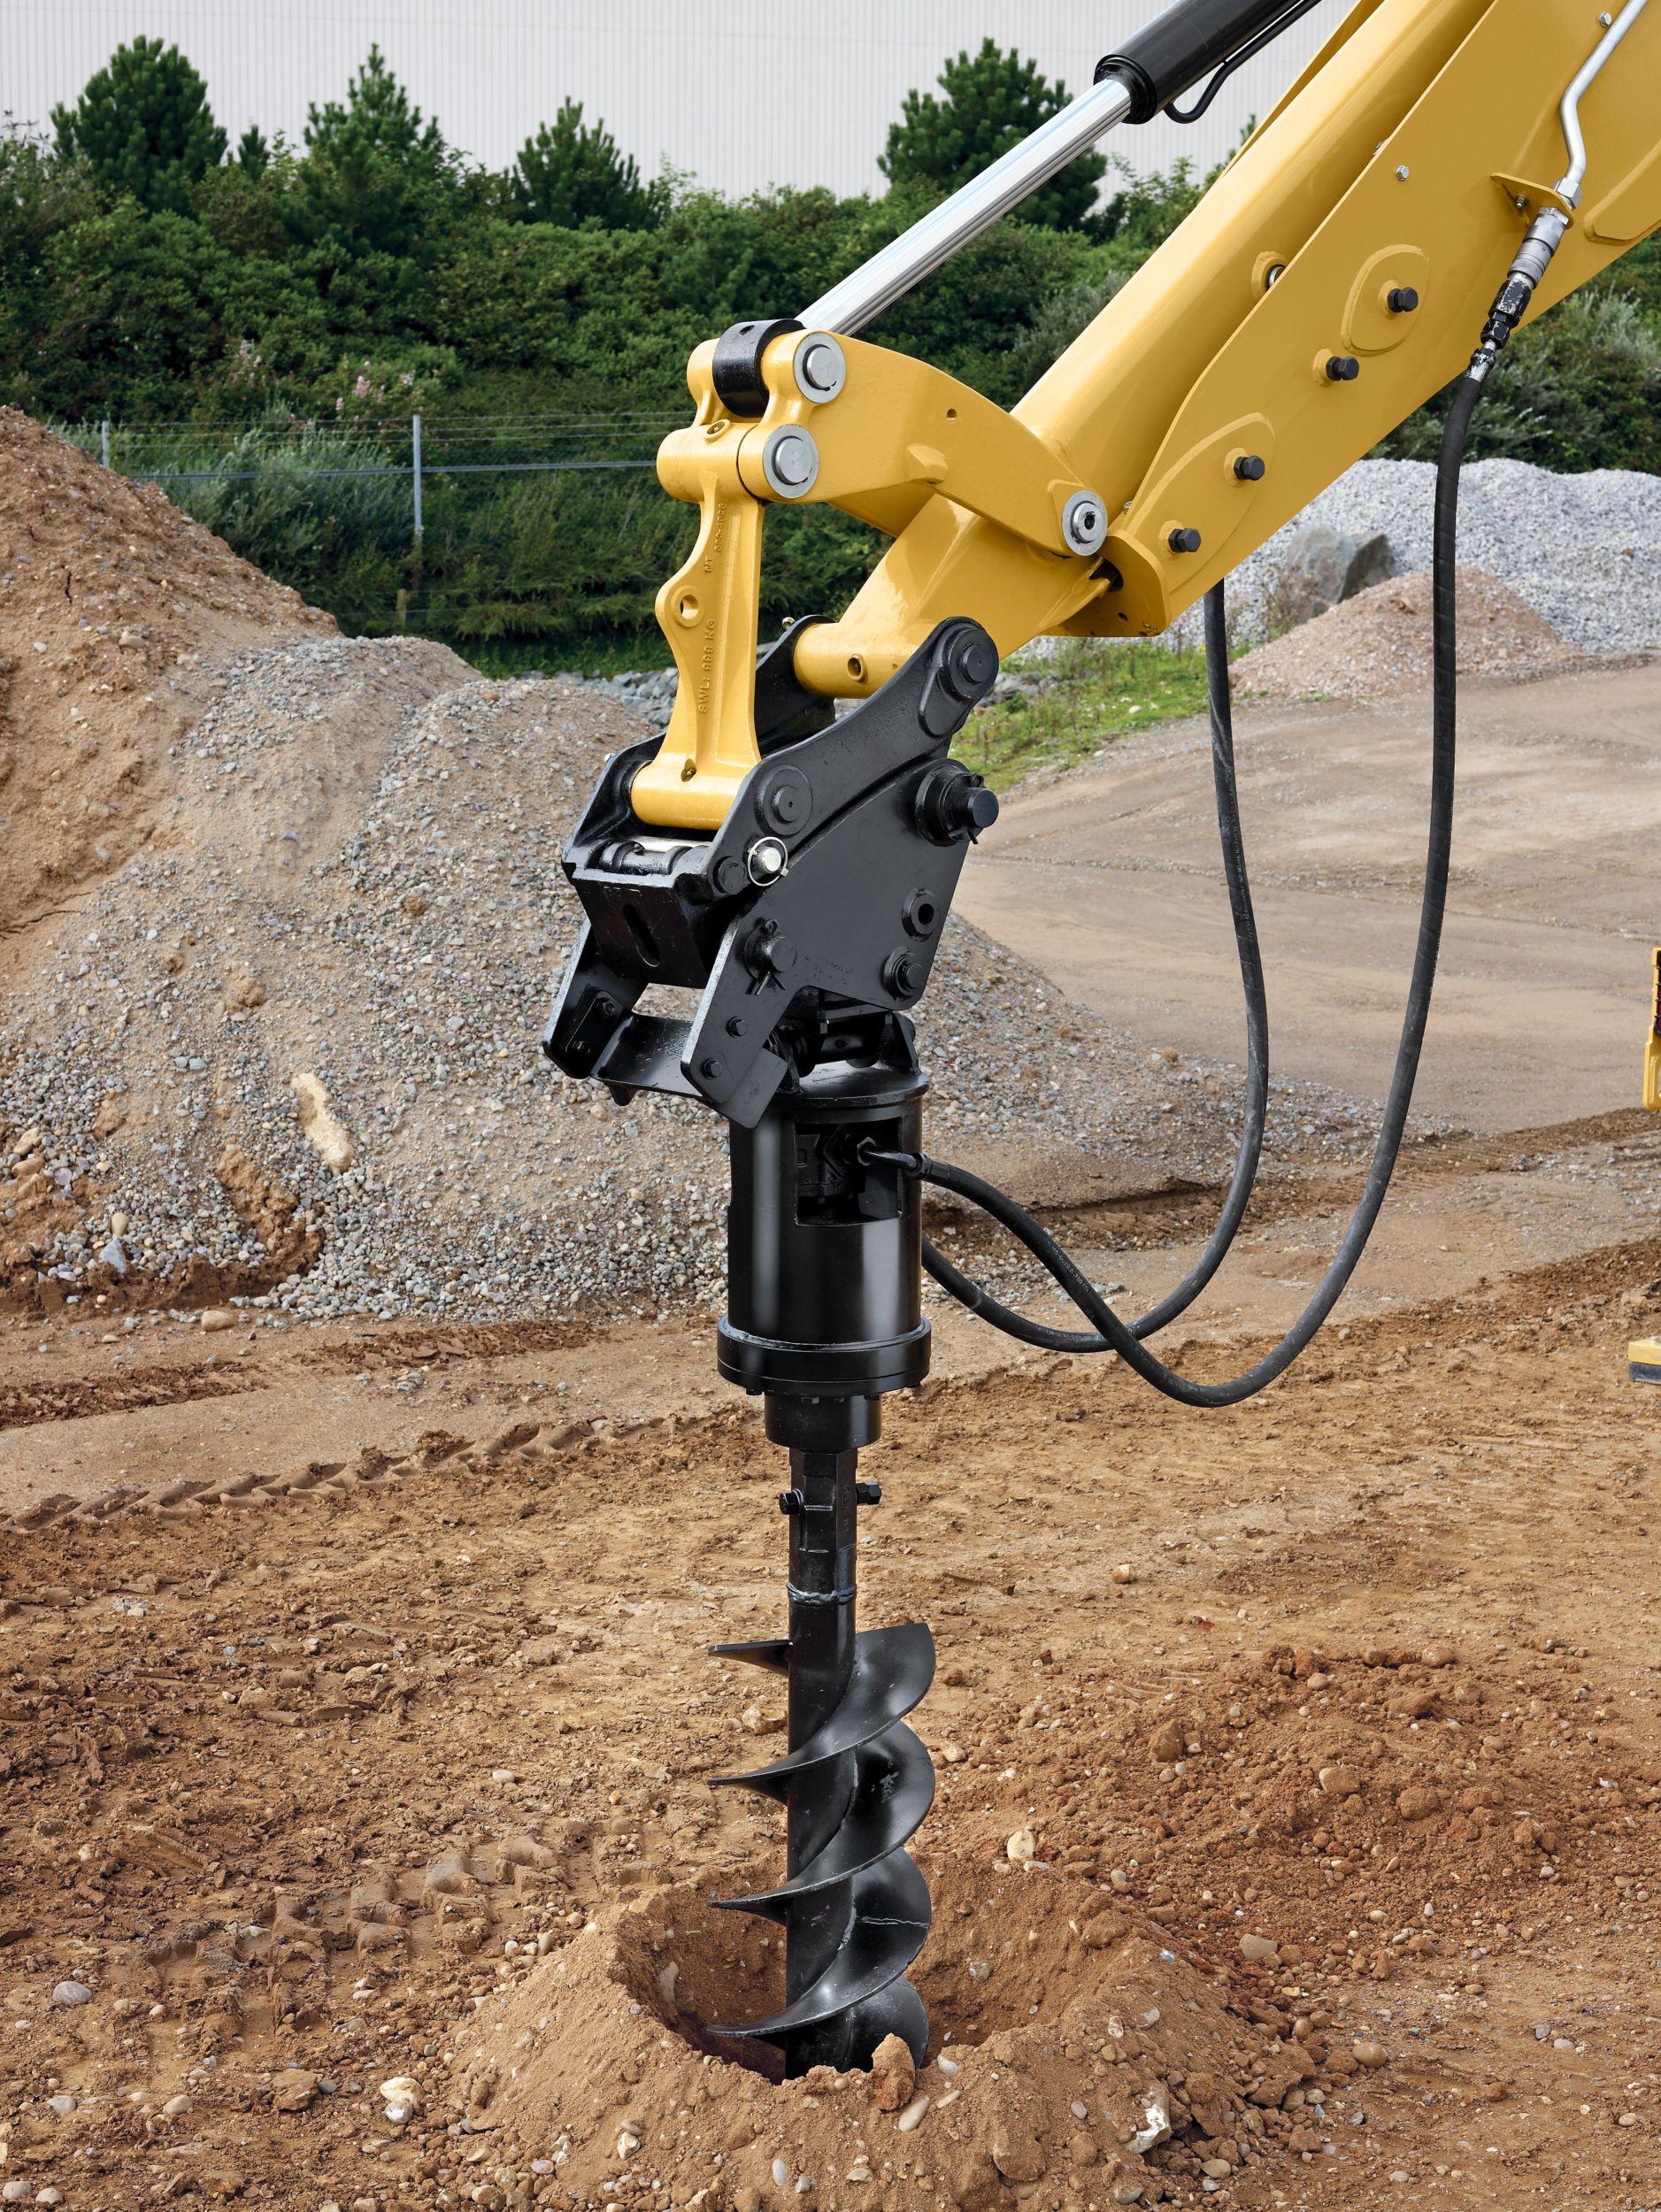 Backhoe – Other Available Backhoe Tools Include: